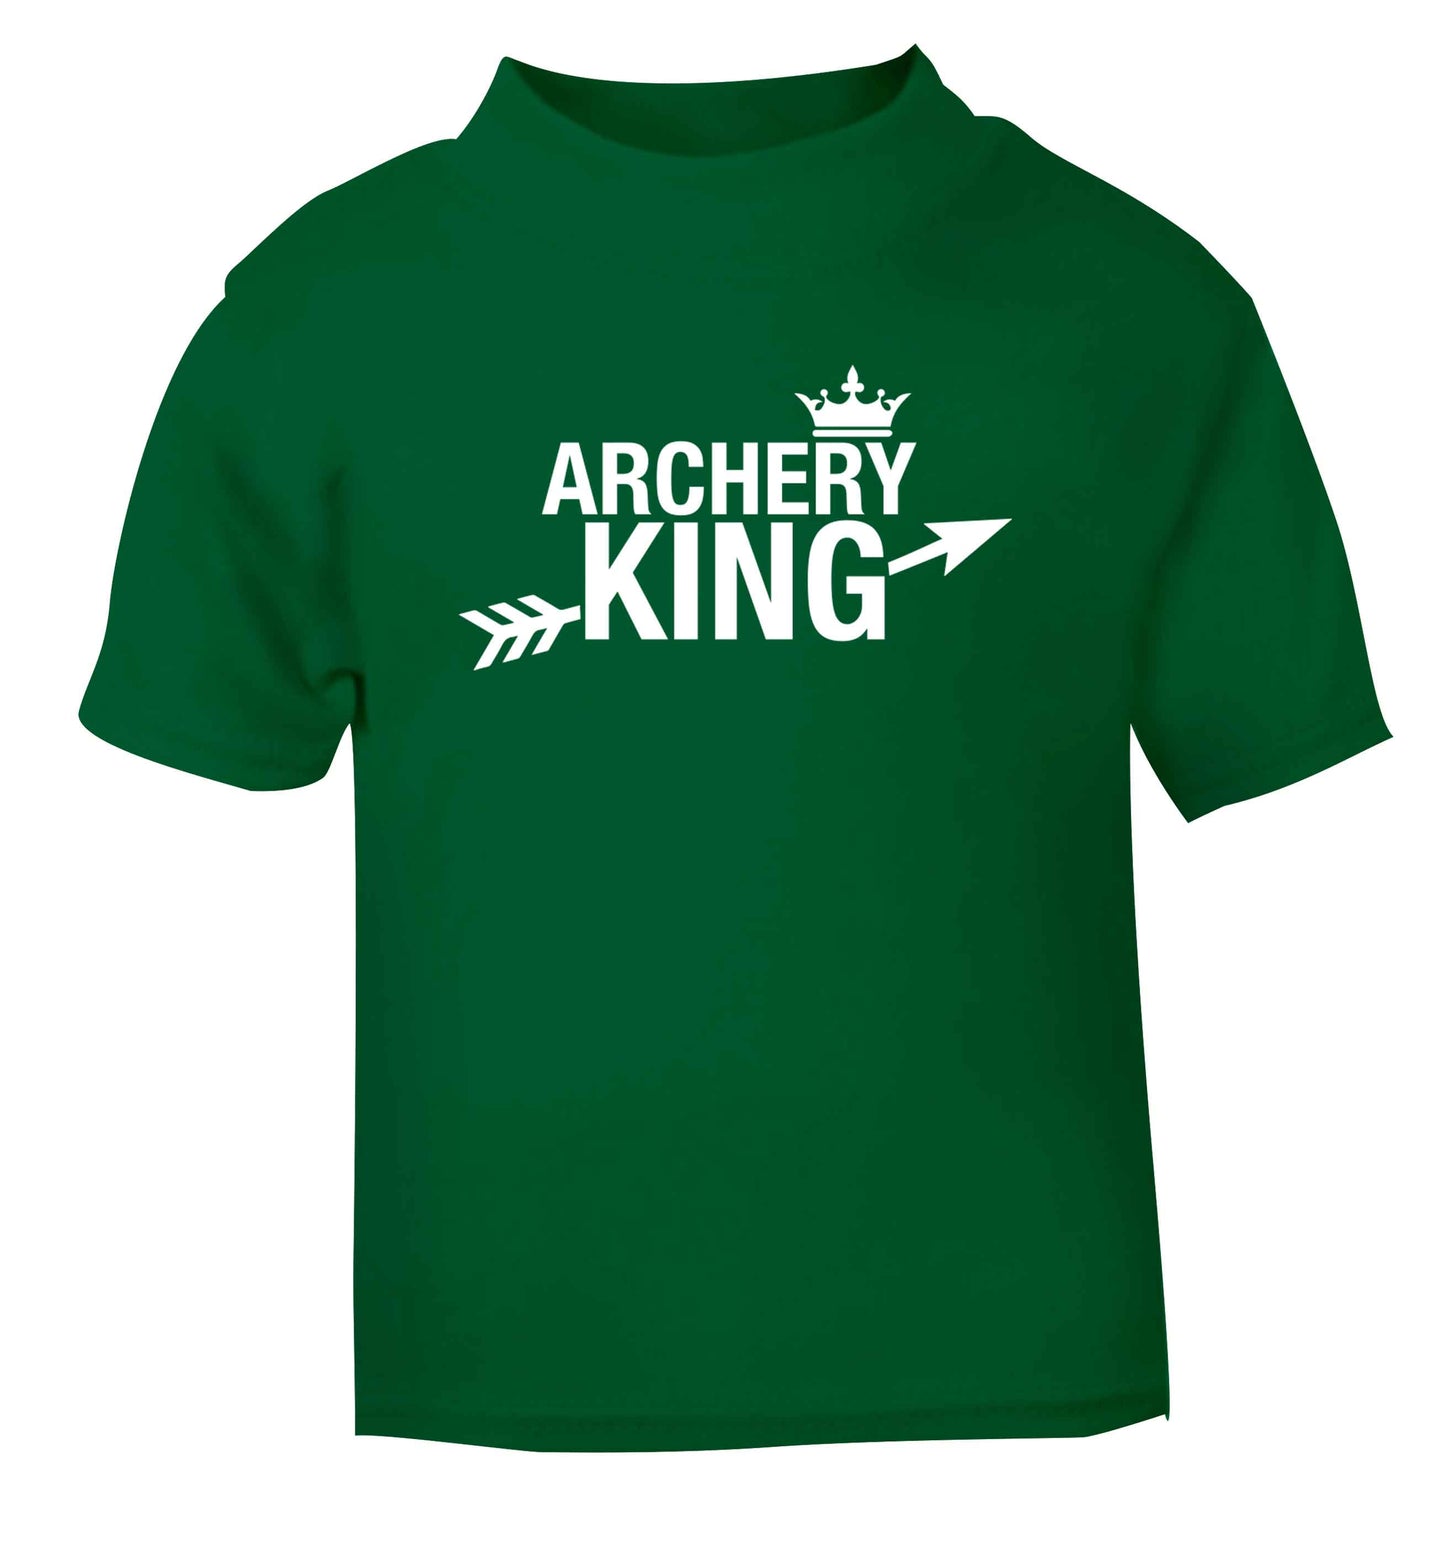 Archery king green Baby Toddler Tshirt 2 Years